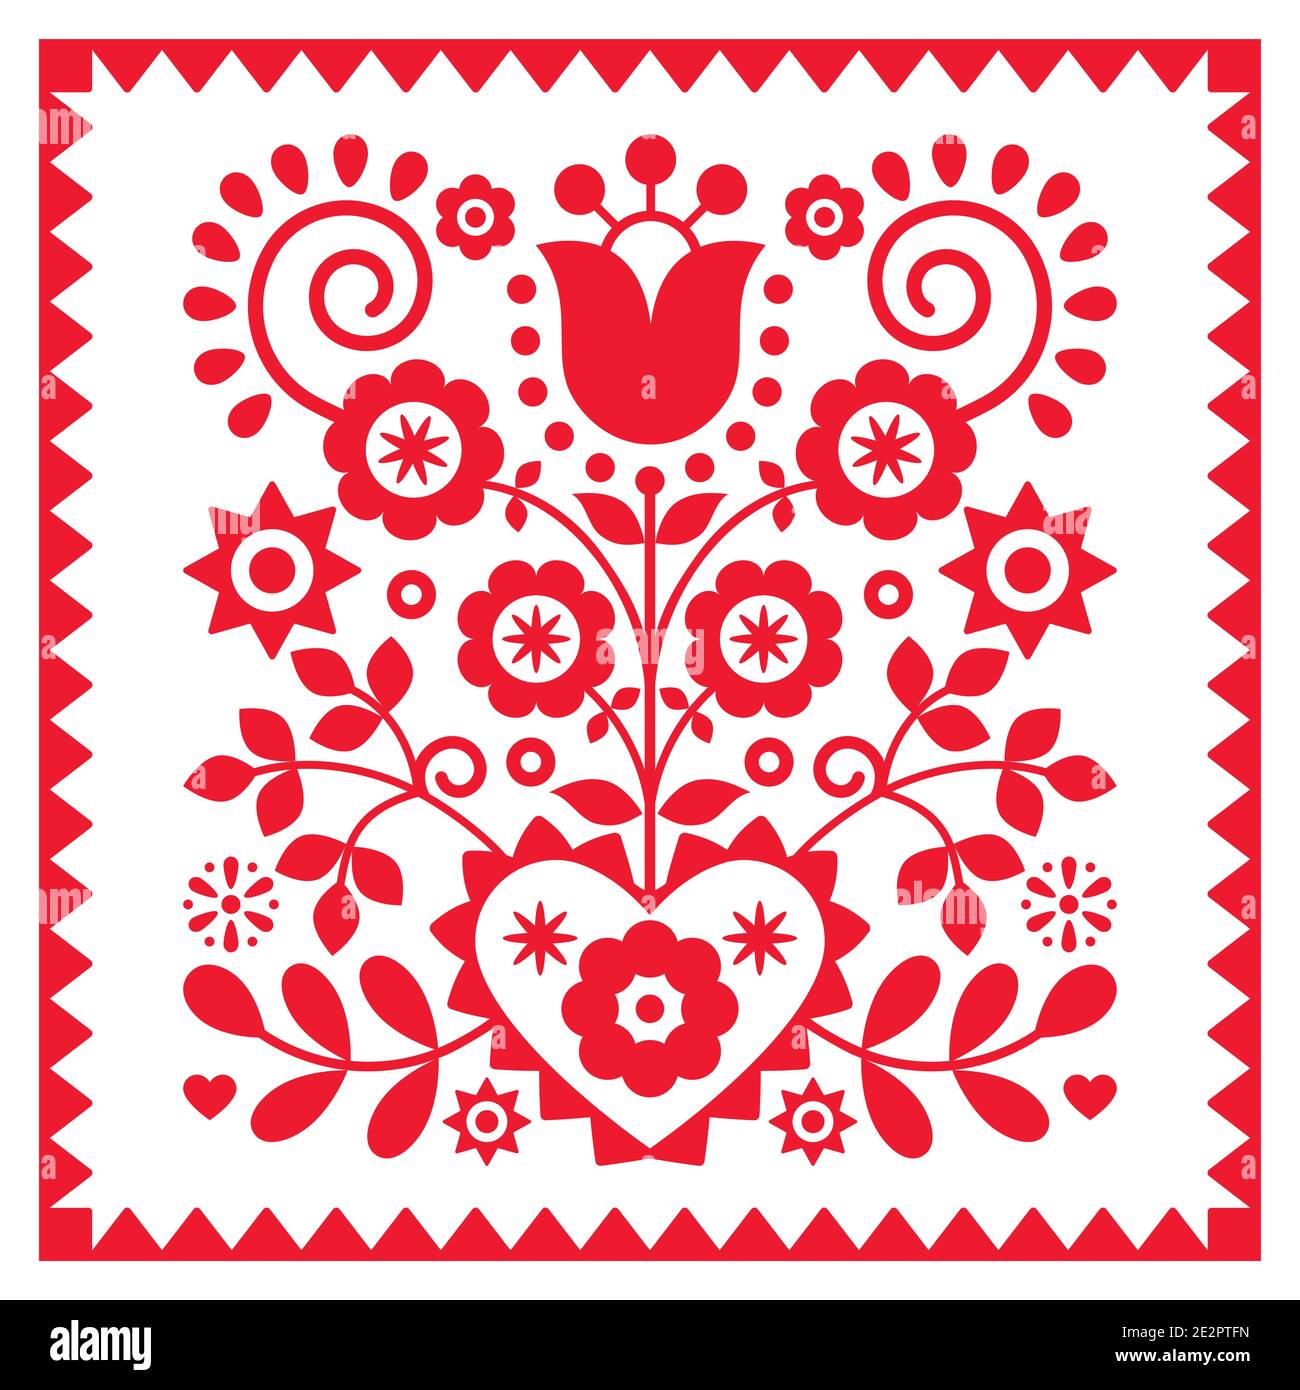 Floral retro folk art vector design in square frame from Nowy Sacz in Poland inspired by traditional highlanders embroidery Lachy Sadeckie Stock Vector